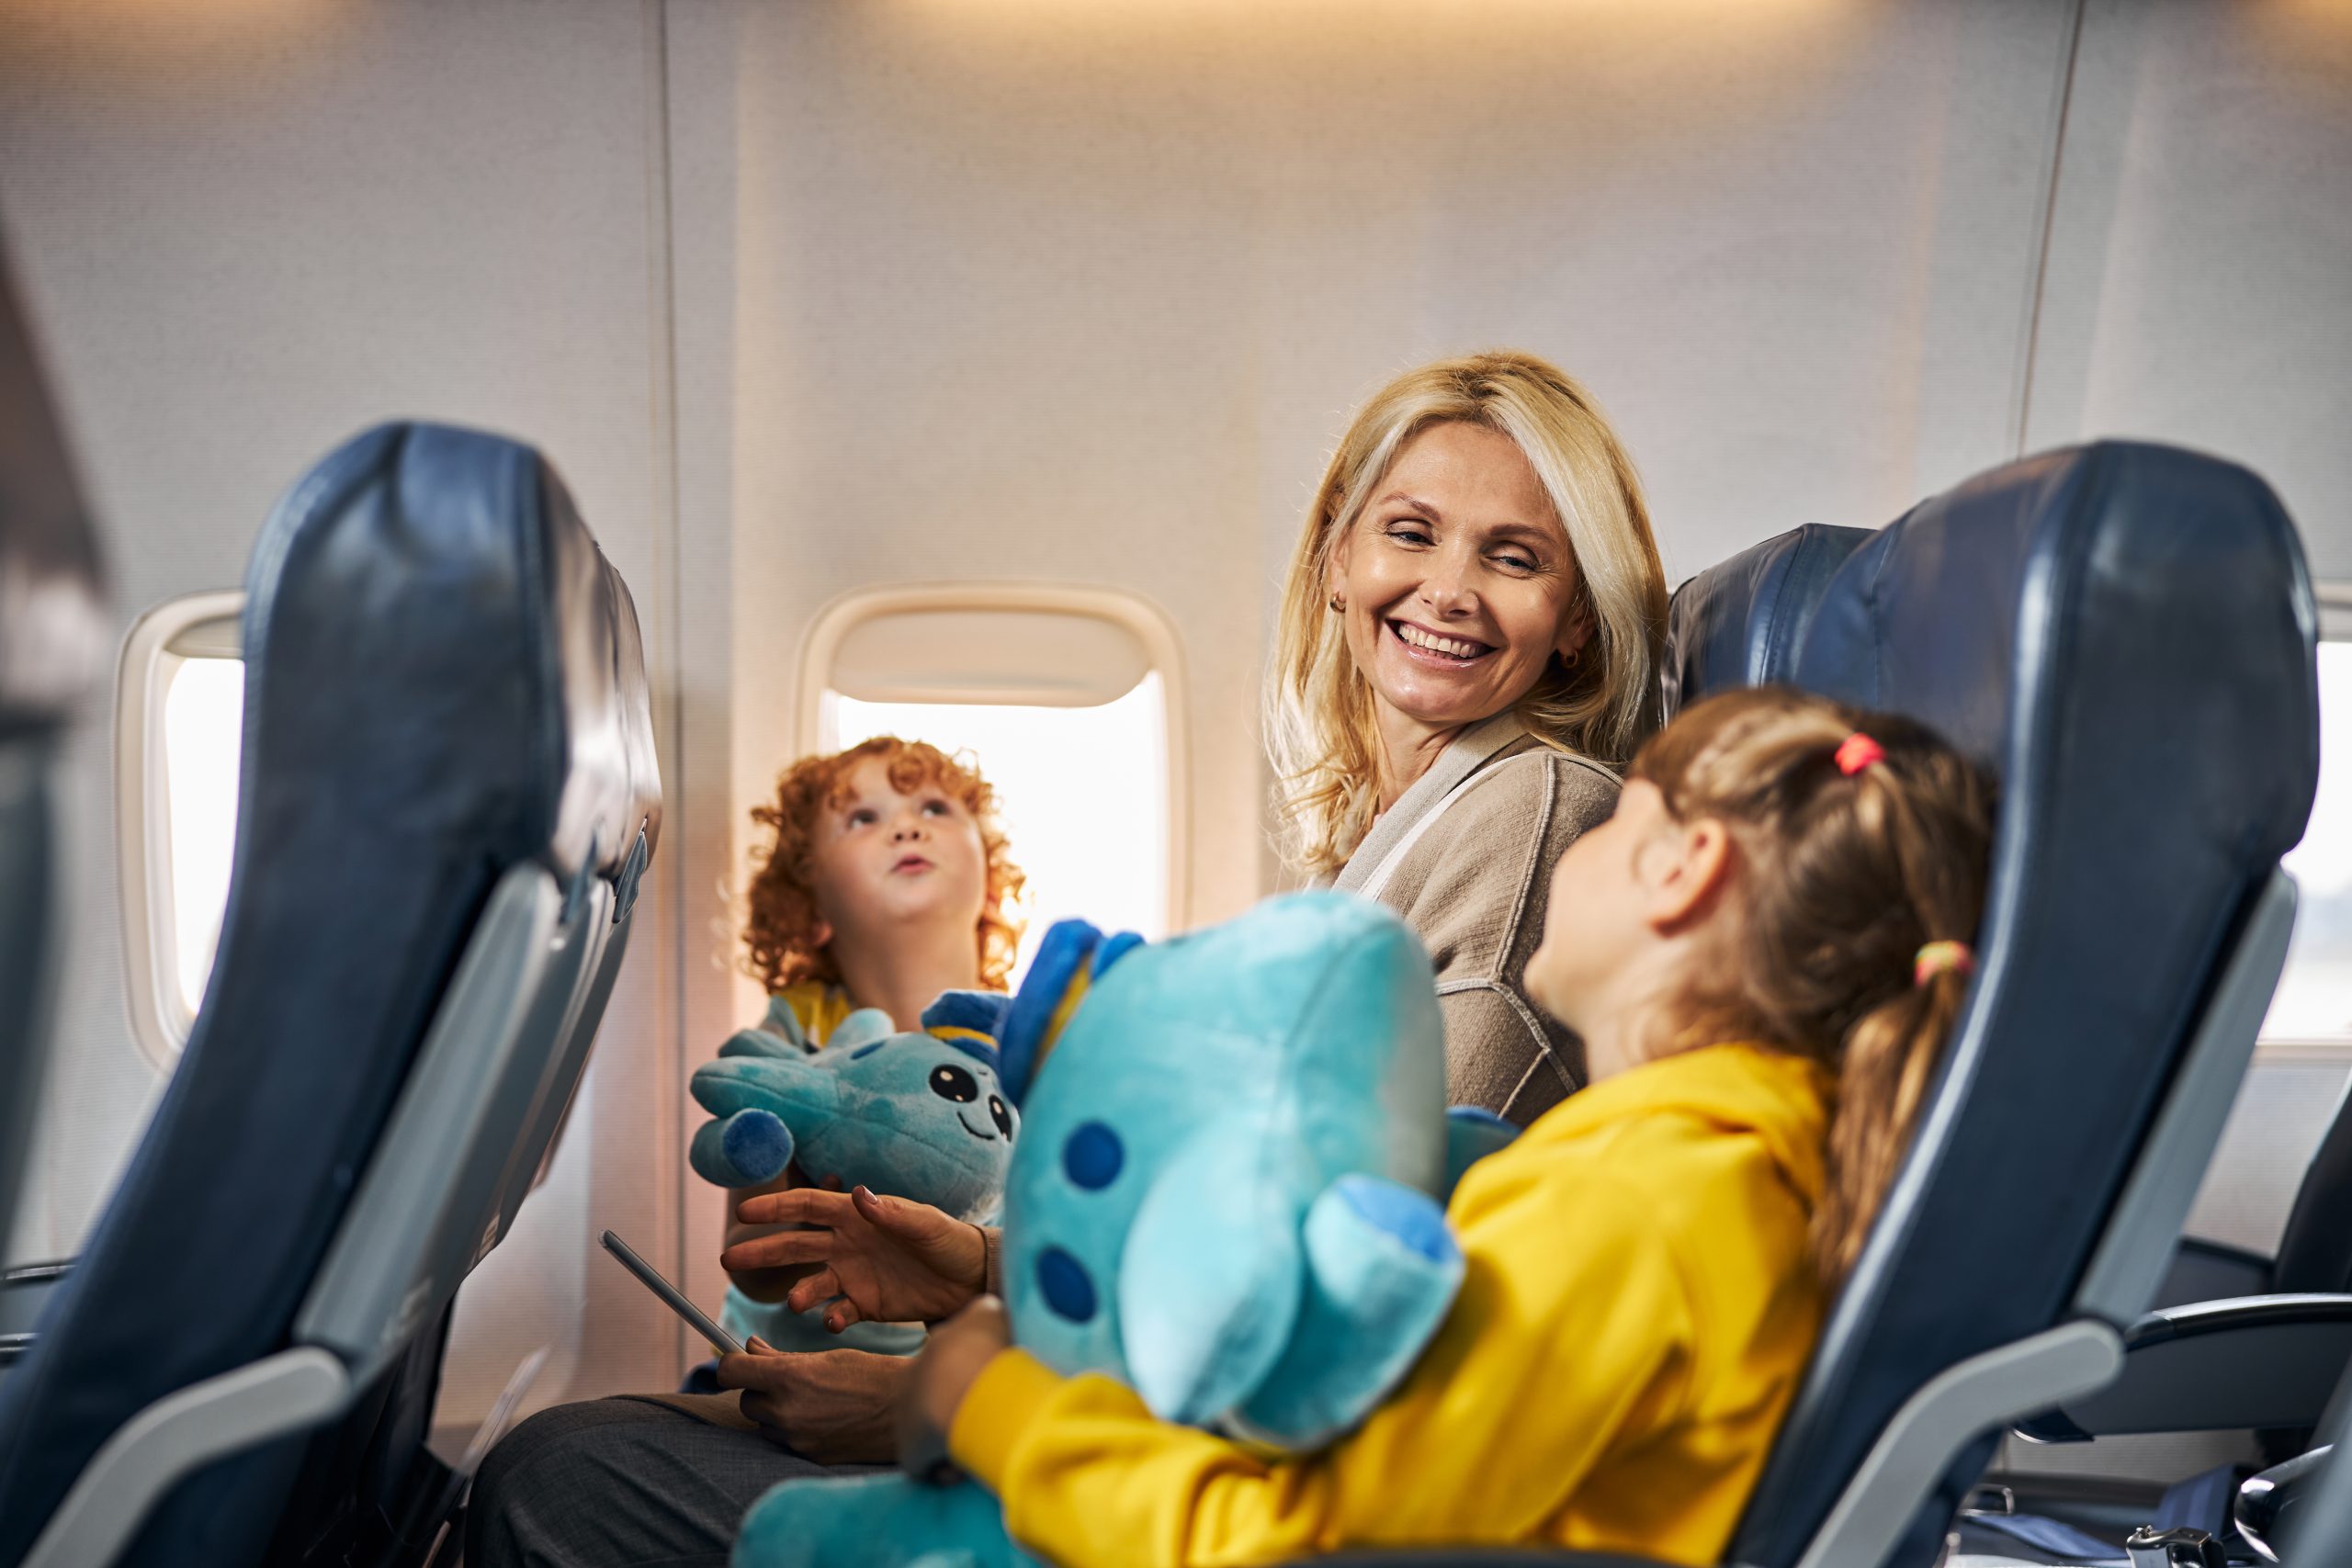 Waist-up photo of a female giving a cheerful look at her child holding a blue soft toy